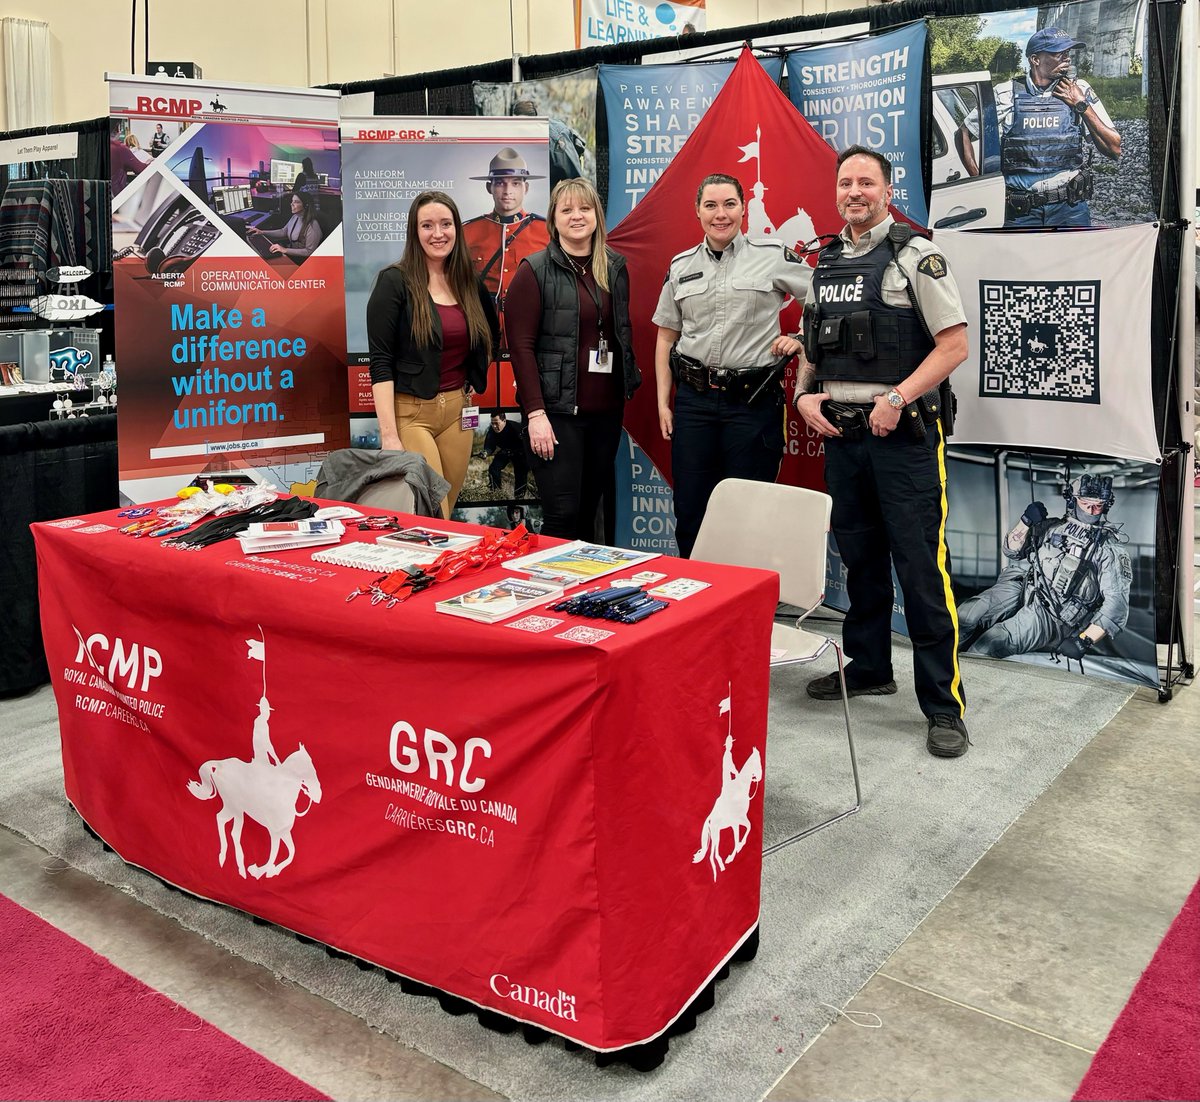 Did you know that members from Recruiting and the Operational Communications Centre are at the National Women's Show in #Calgary this weekend? They'll be available for questions until 6 p.m. today and from 10 a.m. to 5 p.m. tomorrow! #NWShow